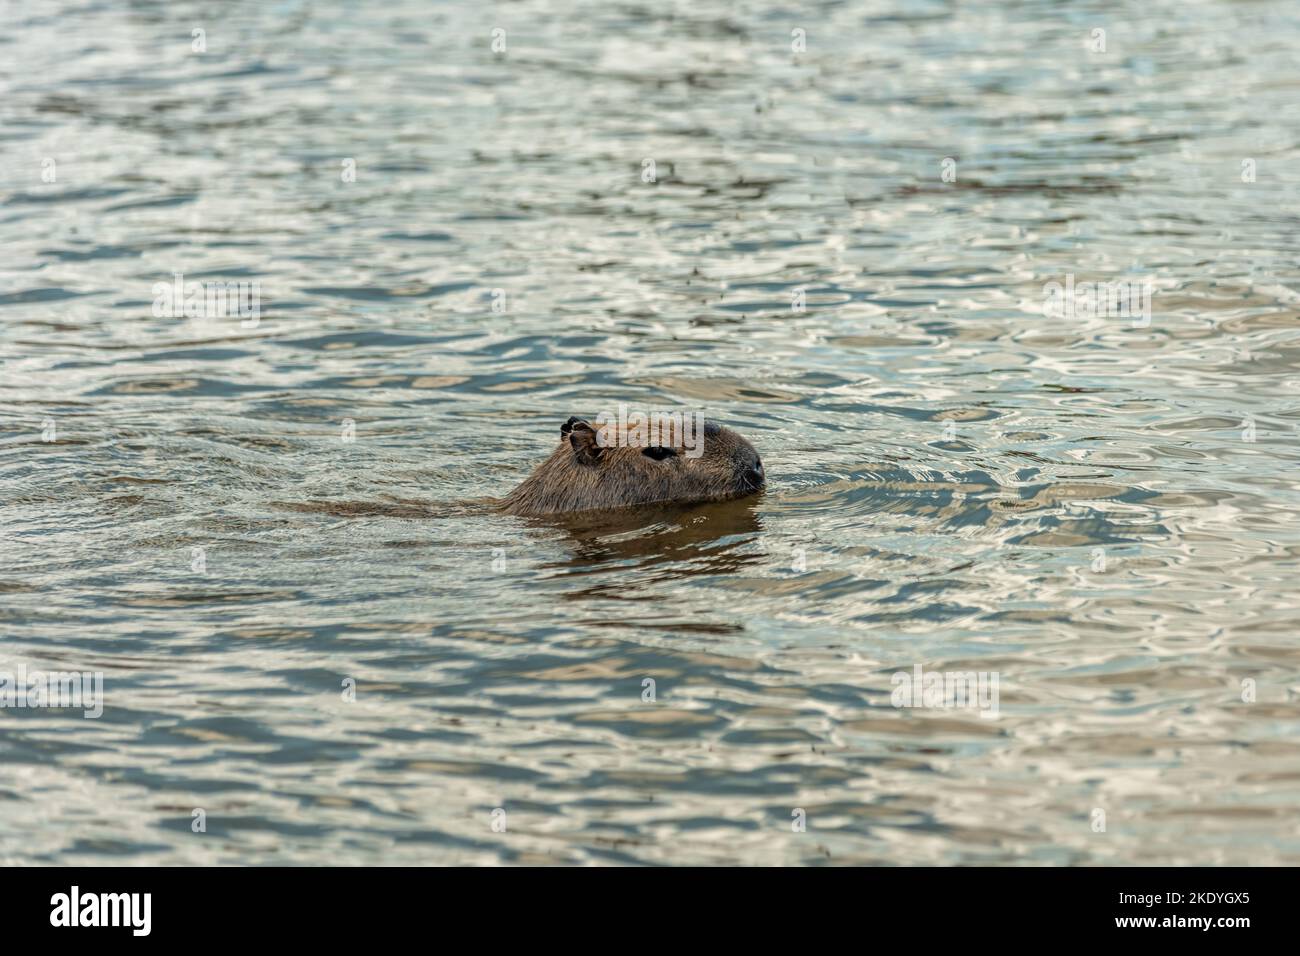 The world's largest rodent Capybara swims in the river Stock Photo